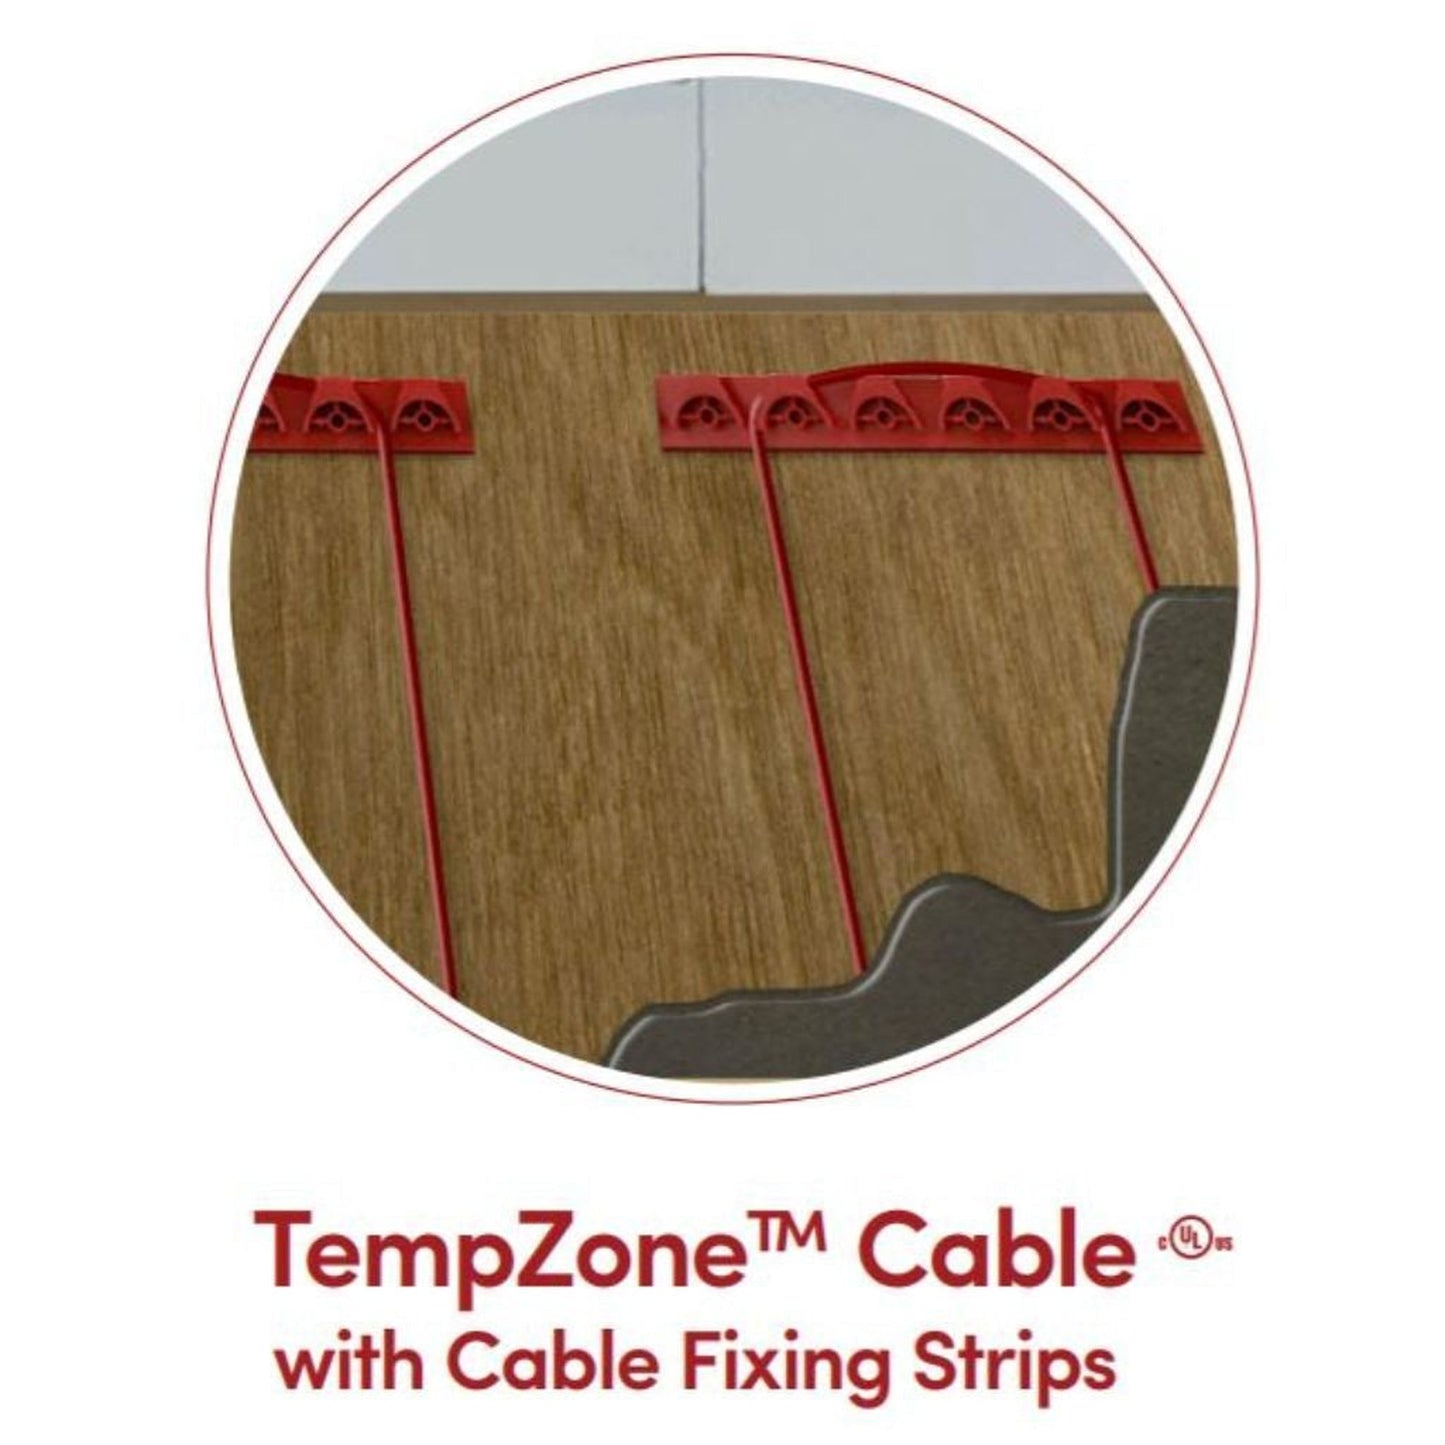 WarmlyYours TempZone Cable 395′ 240V Radiant Floor Heating Cable System Kit With nSpire Touch Programmable Touchscreen Thermostat